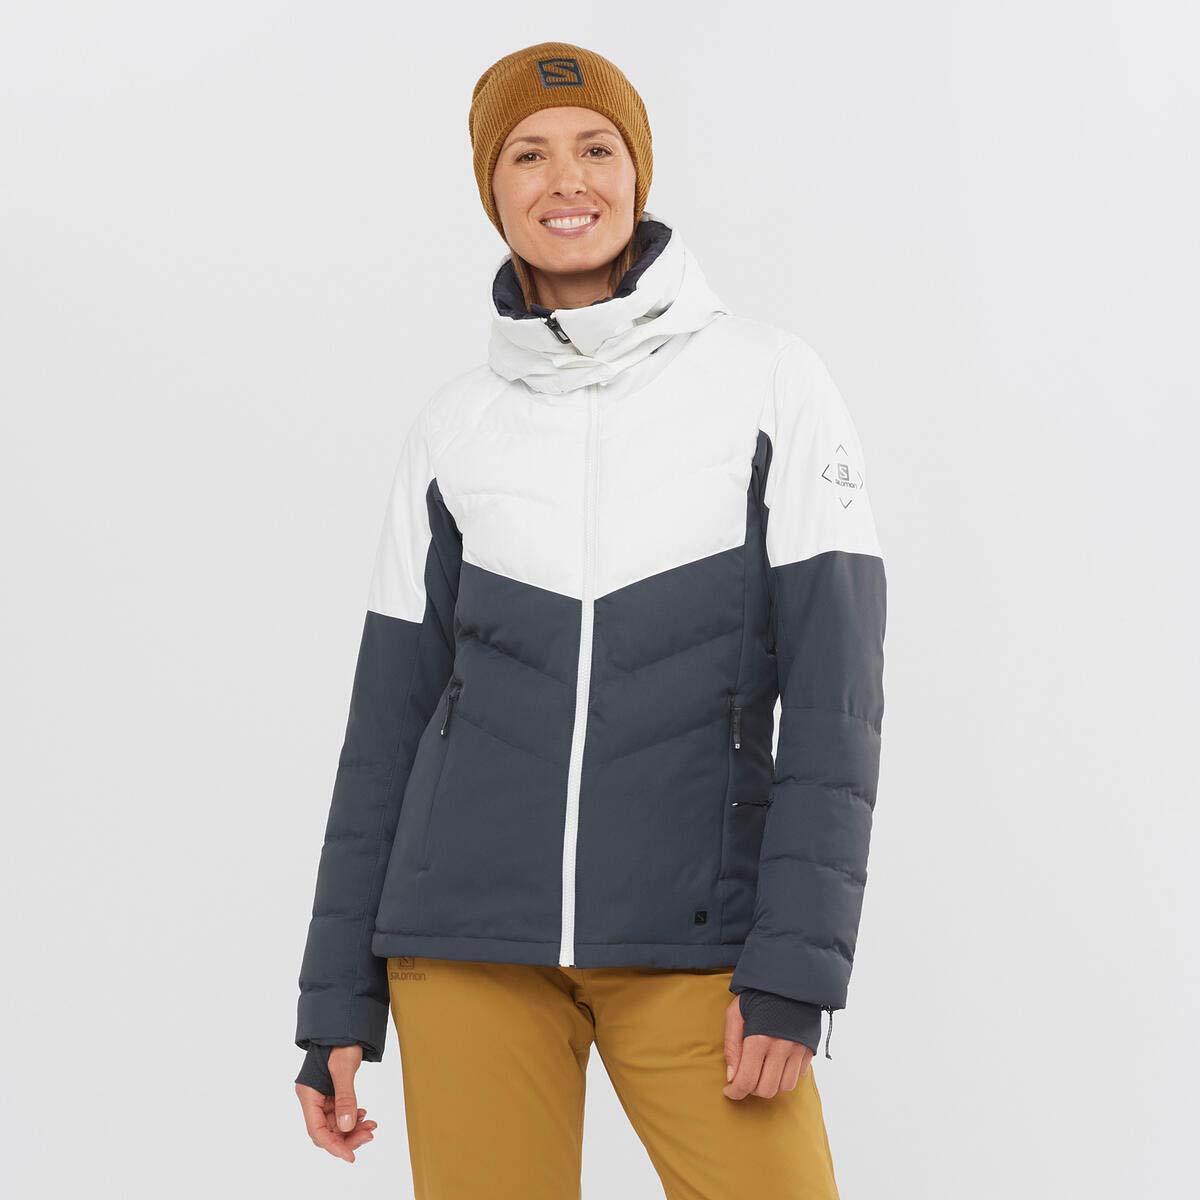 Women's New Prevail Insulated Shell Jacket, 55% OFF